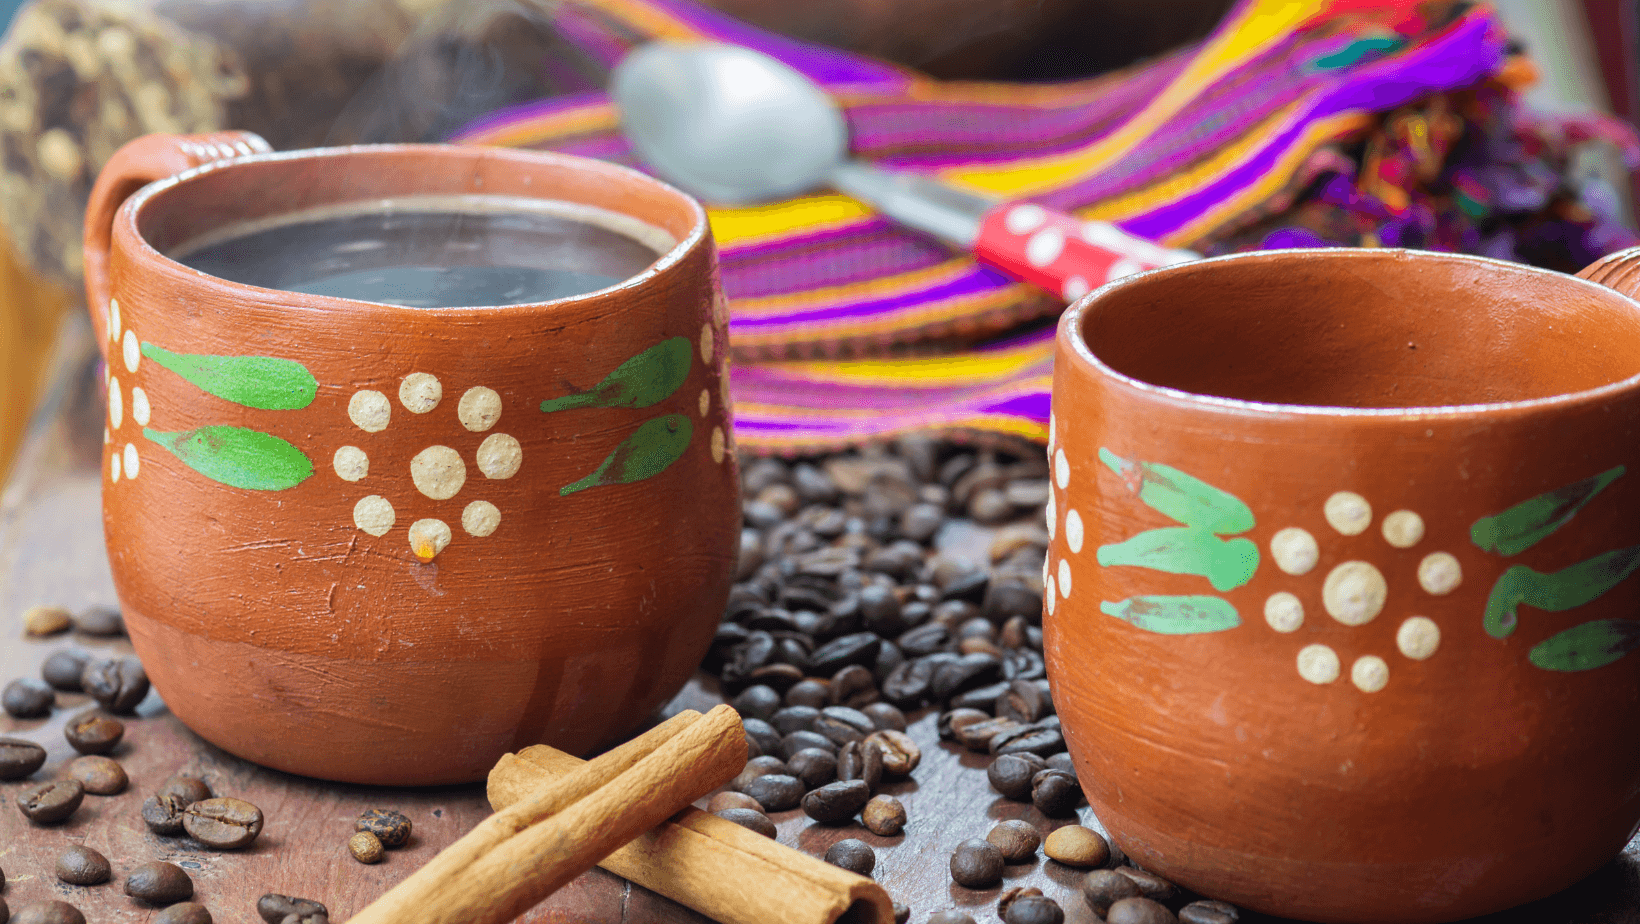 Hola! With Cinco de Mayo coming up we should talk about our Mexican coffee.